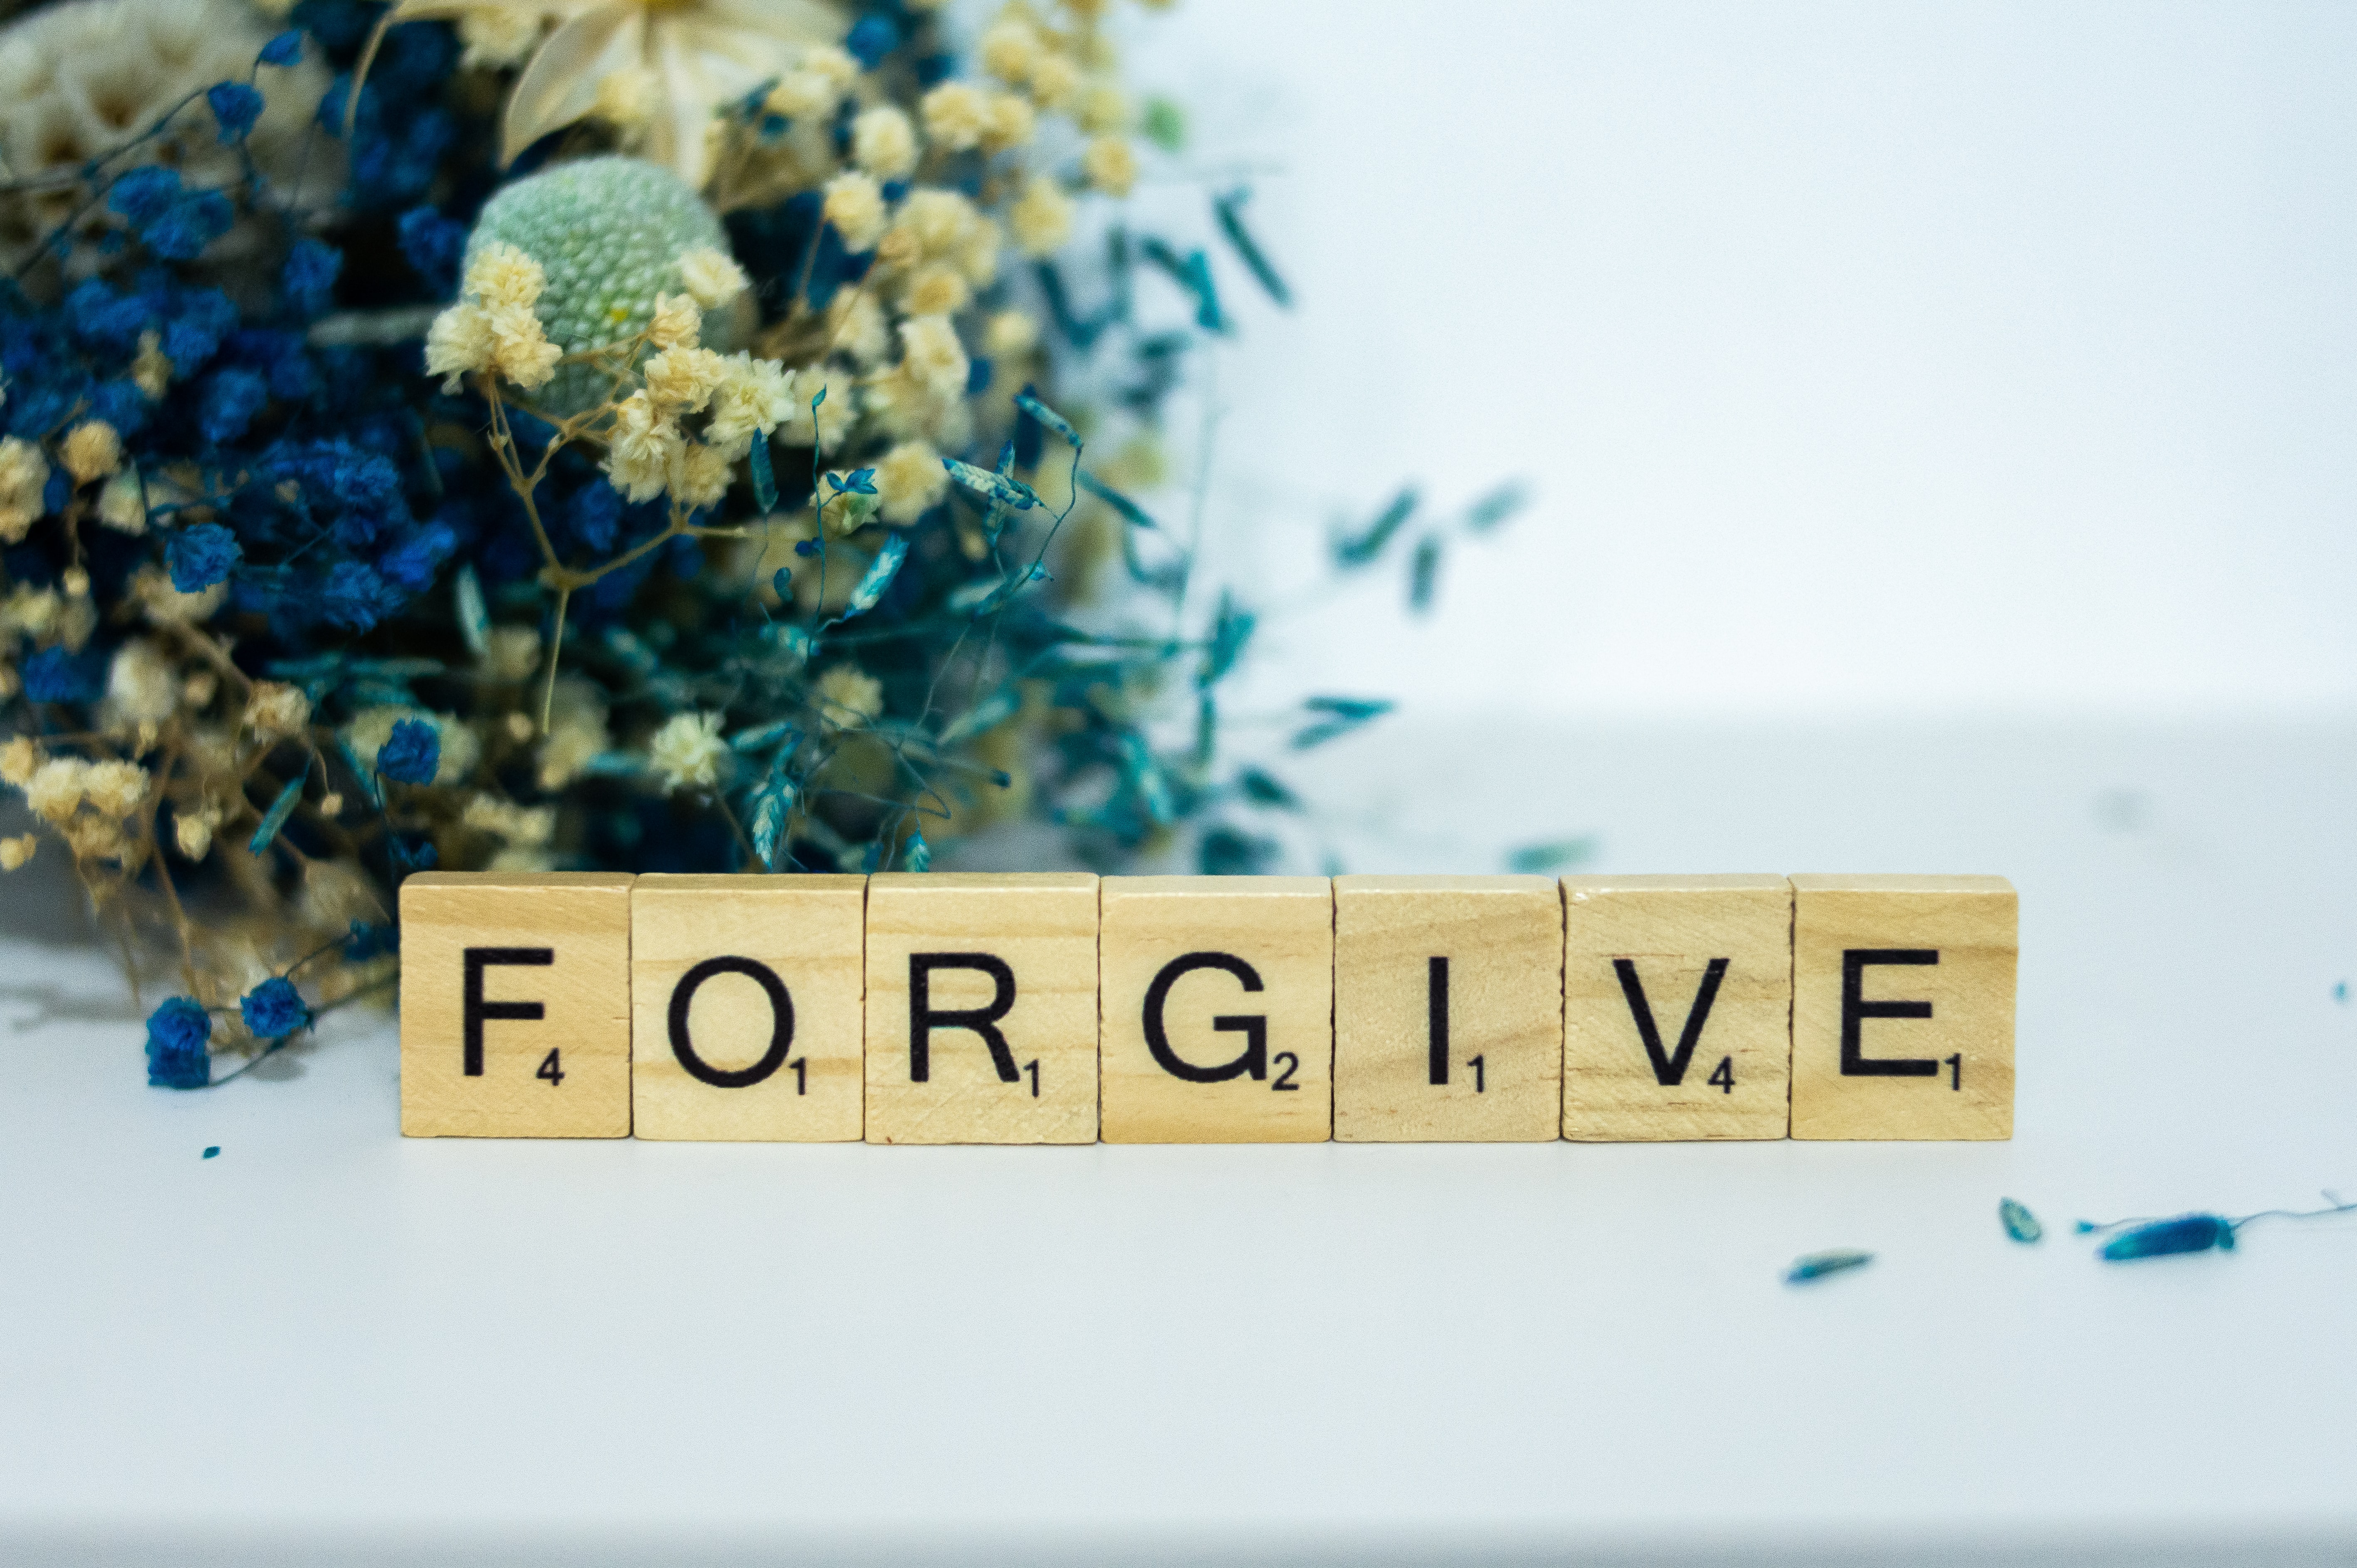 what motivates us to forgive?